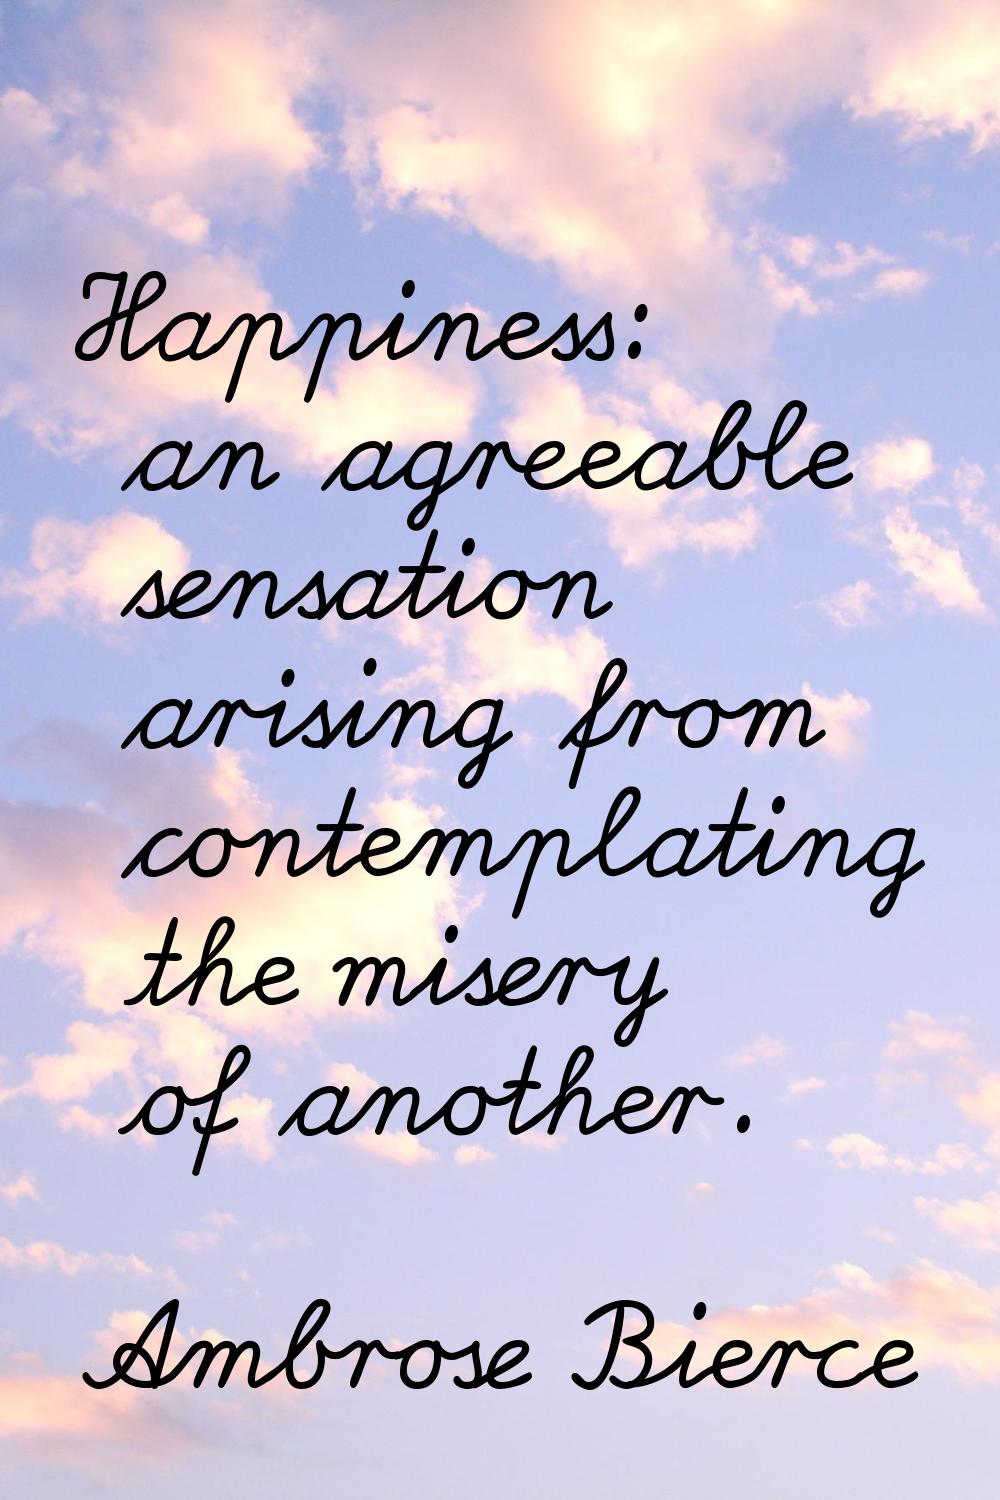 Happiness: an agreeable sensation arising from contemplating the misery of another.